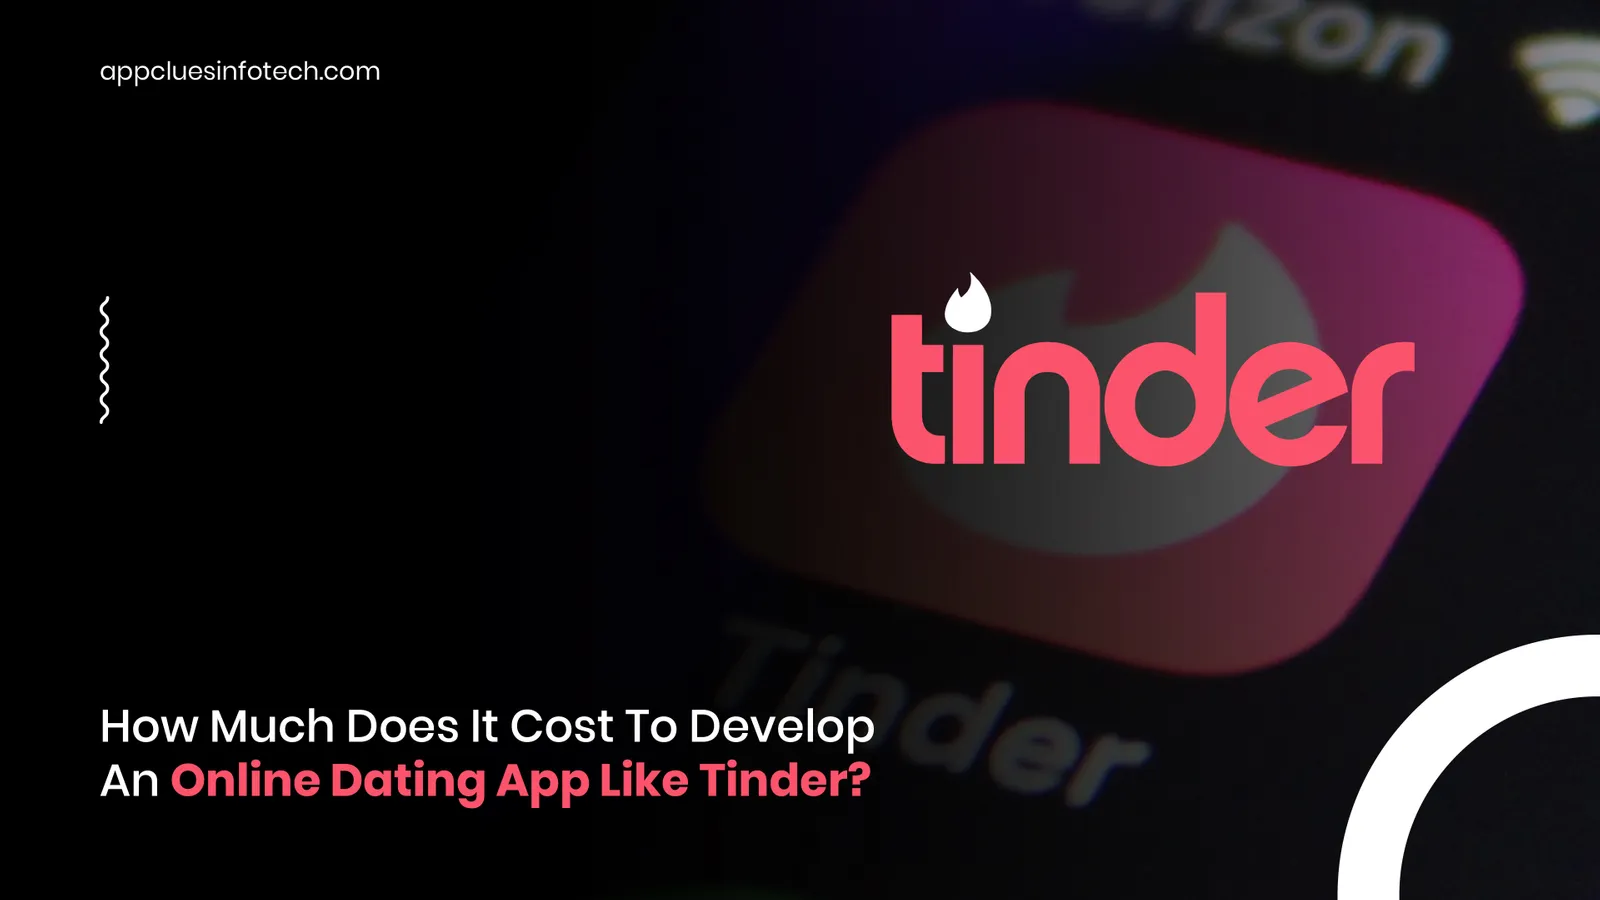 How Much Does It Cost To Develop An Online Dating App Like Tinder?